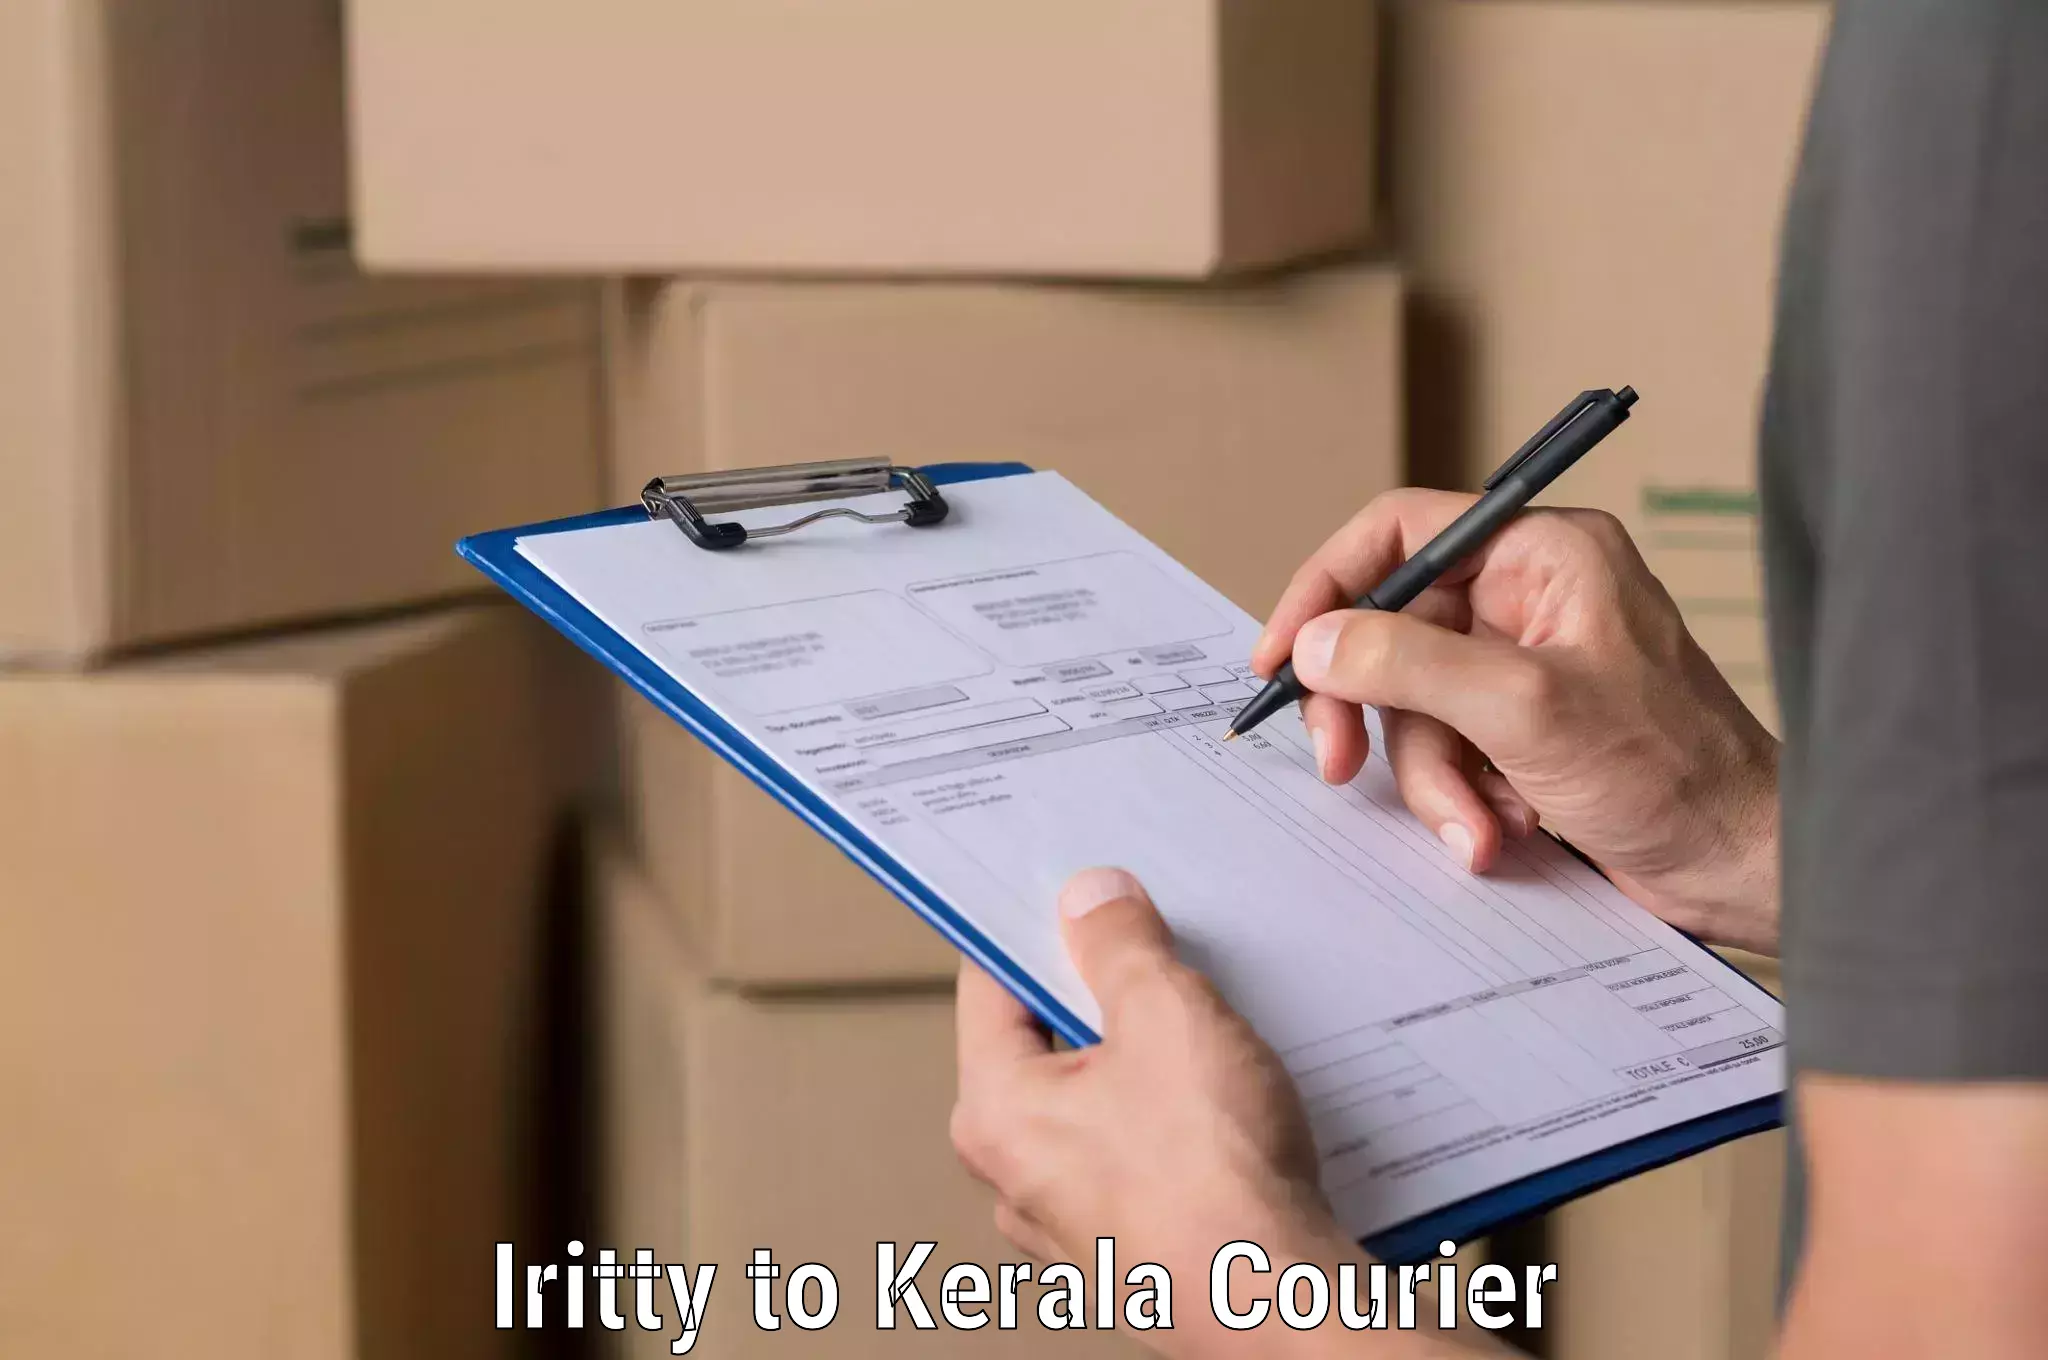 Nationwide courier service Iritty to Kerala